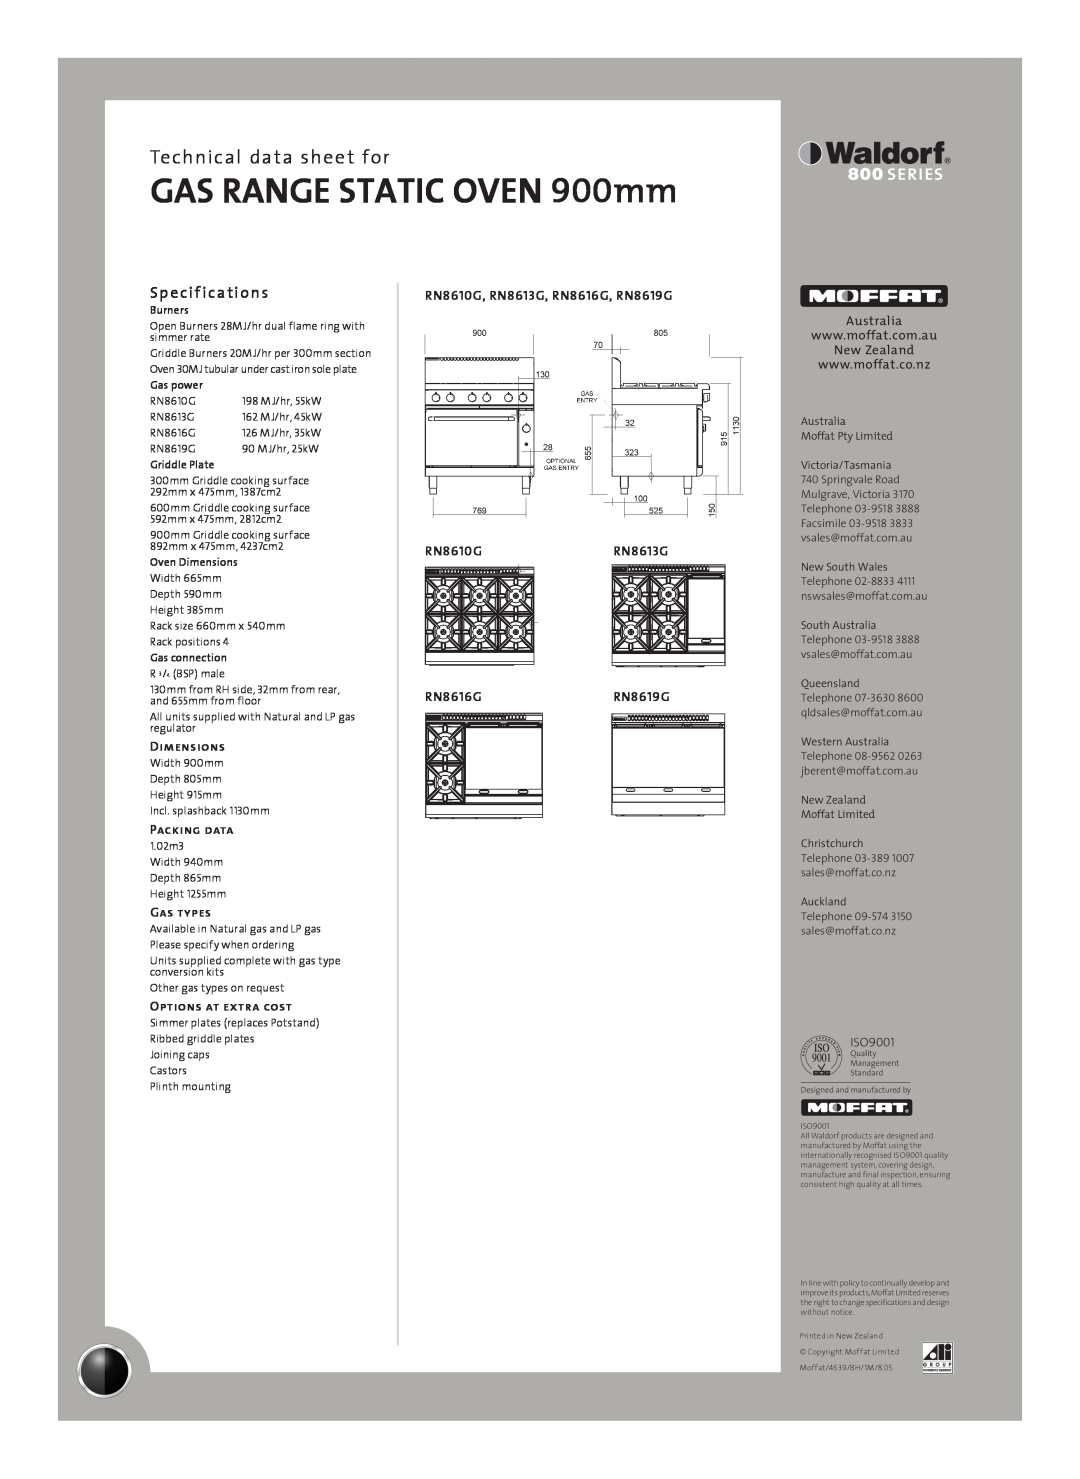 Moffat RN8616G manual Sp e cif ications, GAS RANGE STATIC OVEN 900mm, Technical data sheet for, RN8610GRN8613G, Dimensions 